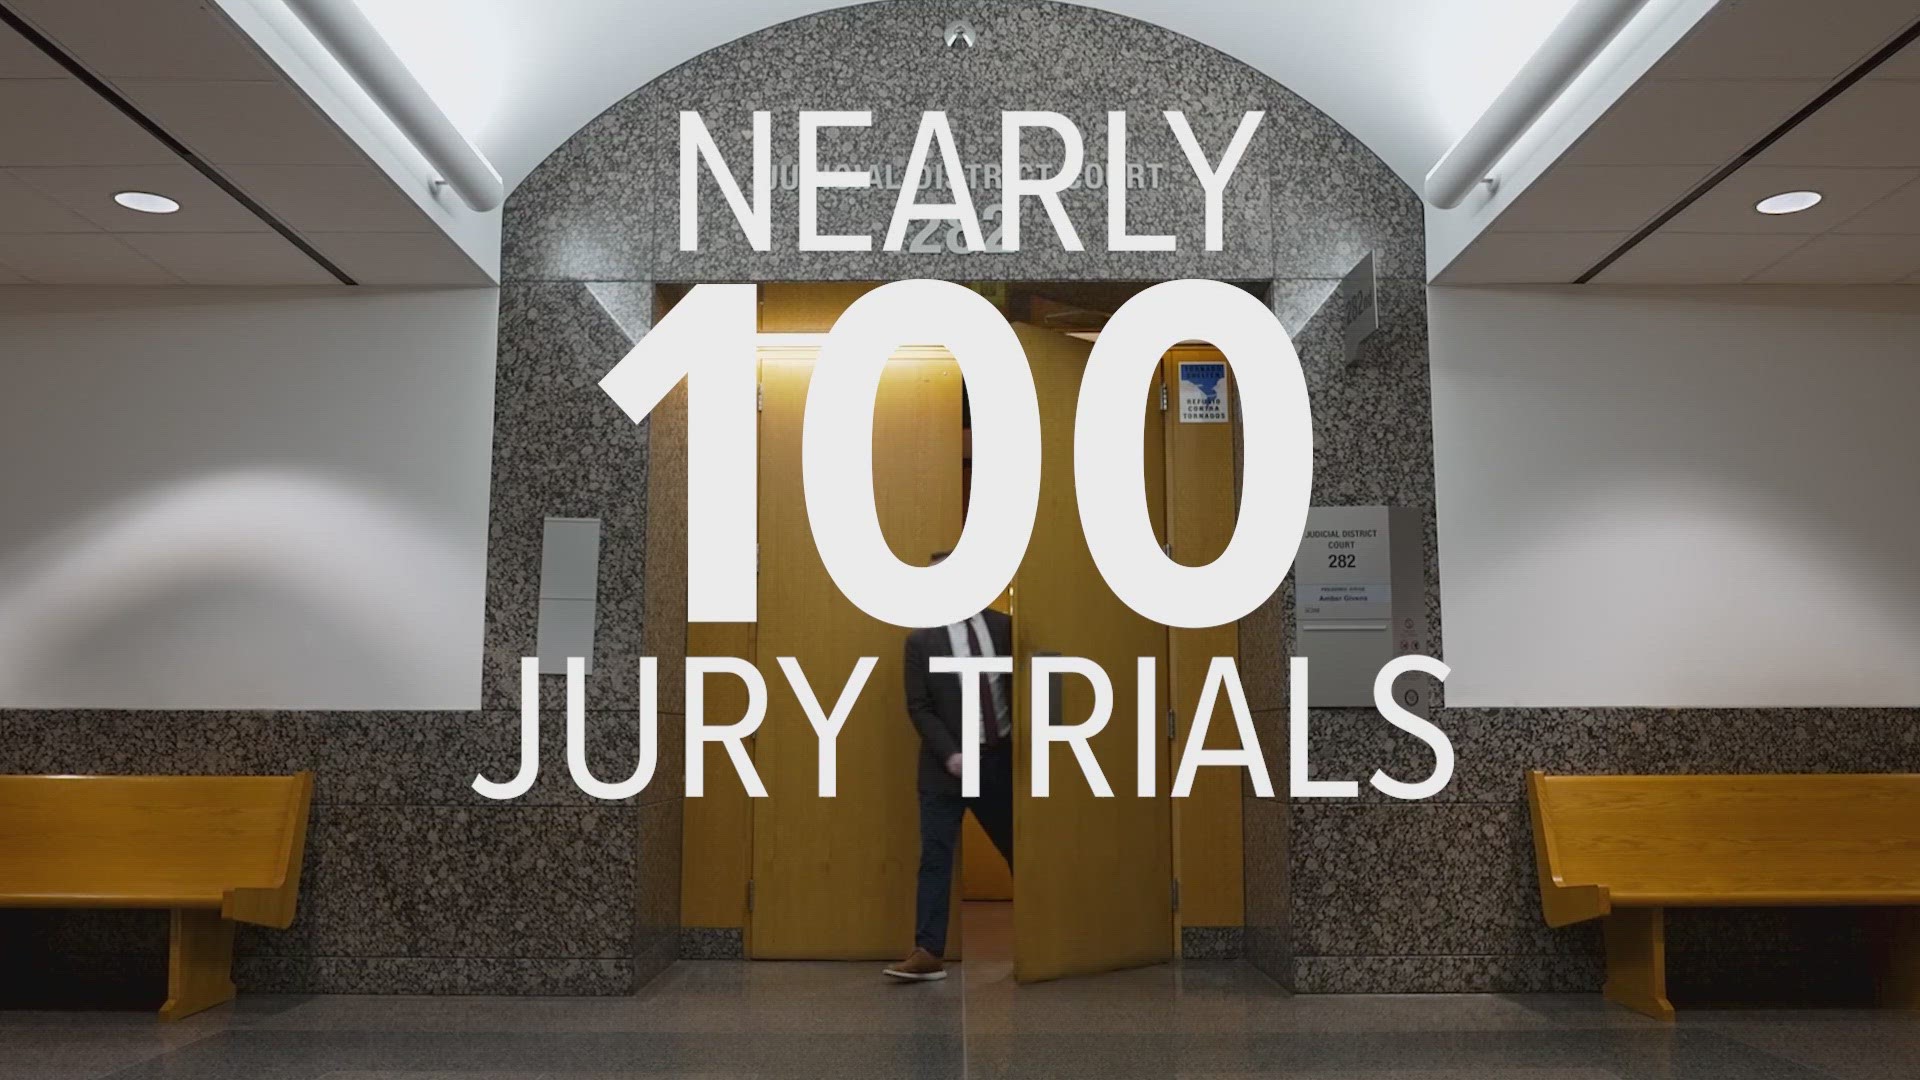 Dallas district judge Amber Givens set dozens of jury trials for April 1, but records show most resulted in dismissals, delays or pleas late last week.